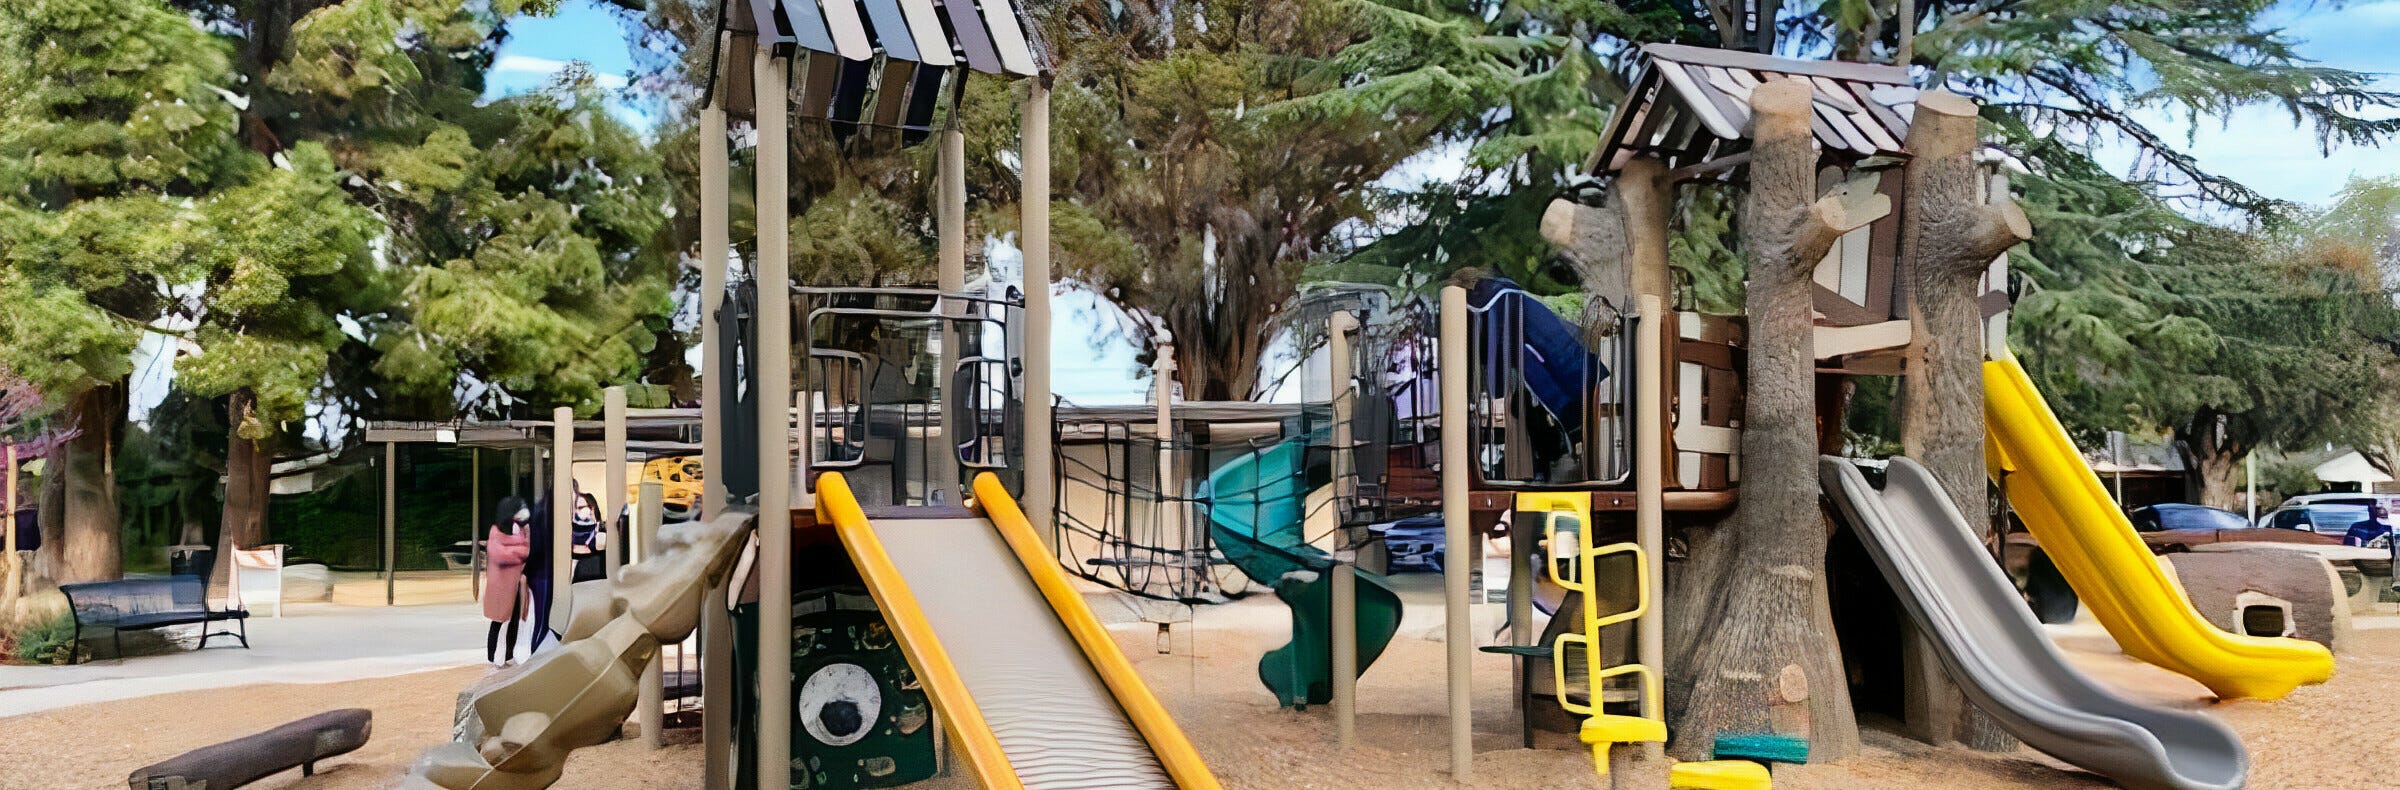 New California Playground Made Possible by GameTime Playground Grant